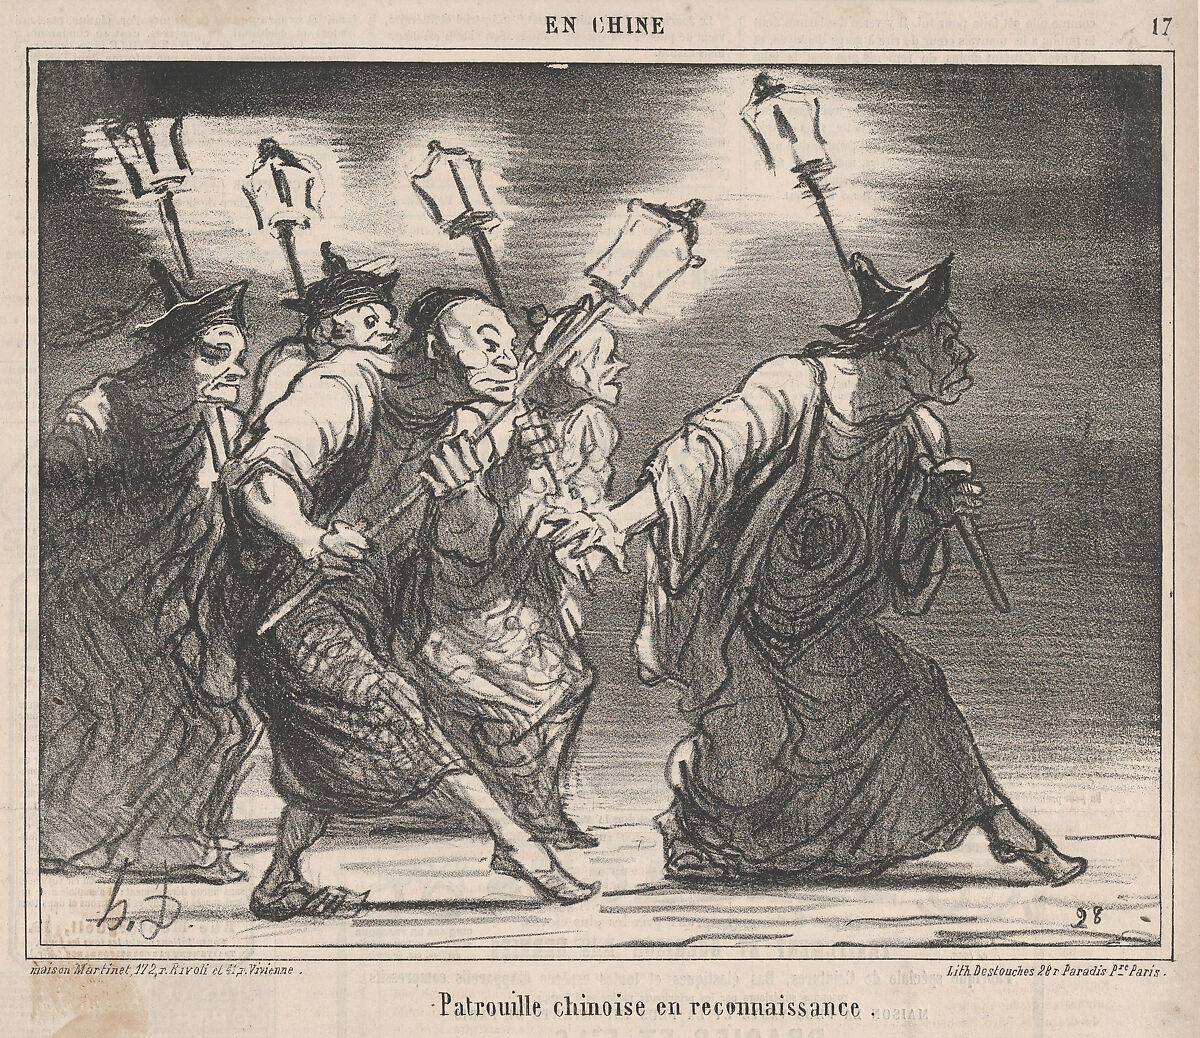 Patrouille chinoise en reçonnaissance, from En Chine, published in Le Charivari, November 7, 1859, Honoré Daumier (French, Marseilles 1808–1879 Valmondois), Lithograph on newsprint; second state of three (Hazard & Delteil) 